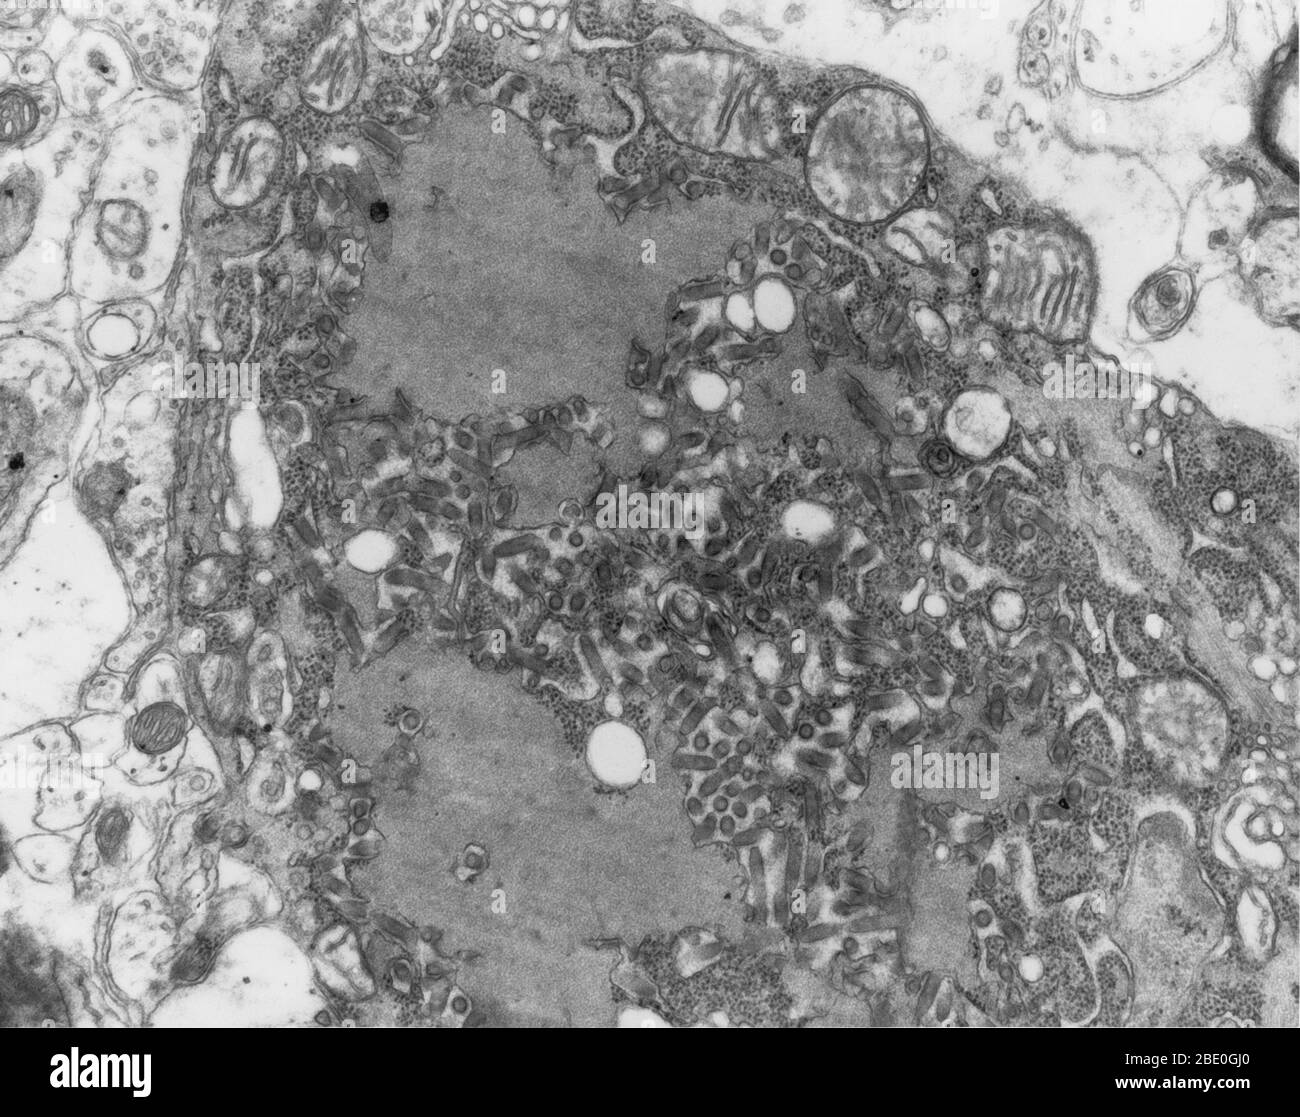 Transmission electron micrograph shows multiple rabies viruses, dark and bullet-shaped, within an infected tissue sample. Rabies is a preventable viral disease of mammals most often transmitted through the bite of a rabid animal. The vast majority of rabies cases reported to the Centers for Disease Control and Prevention (CDC) each year occur in wild animals like raccoons, skunks, bats, and foxes. Domestic animals account for less than 10% of the reported rabies cases, with cats, cattle, and dogs most often reported rabid. Stock Photo